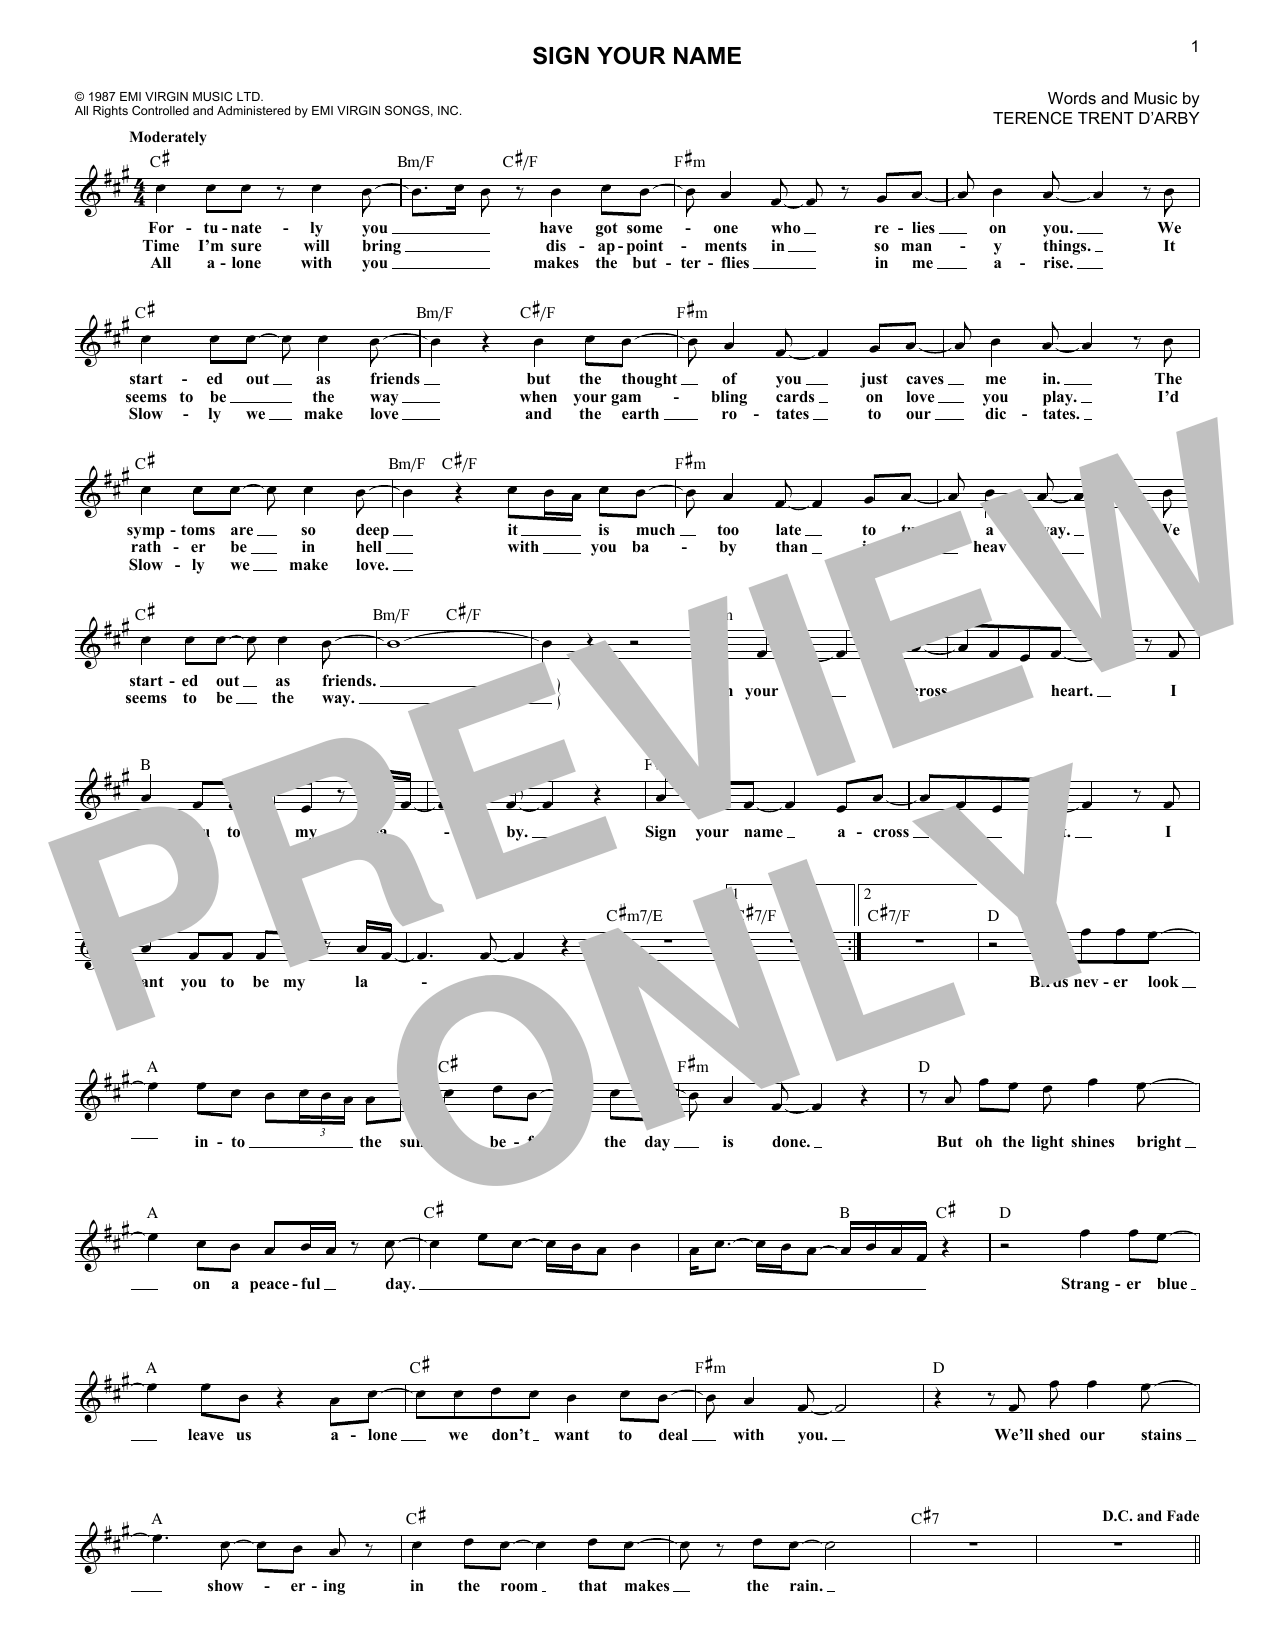 Download Terence Trent D'Arby Sign Your Name Sheet Music